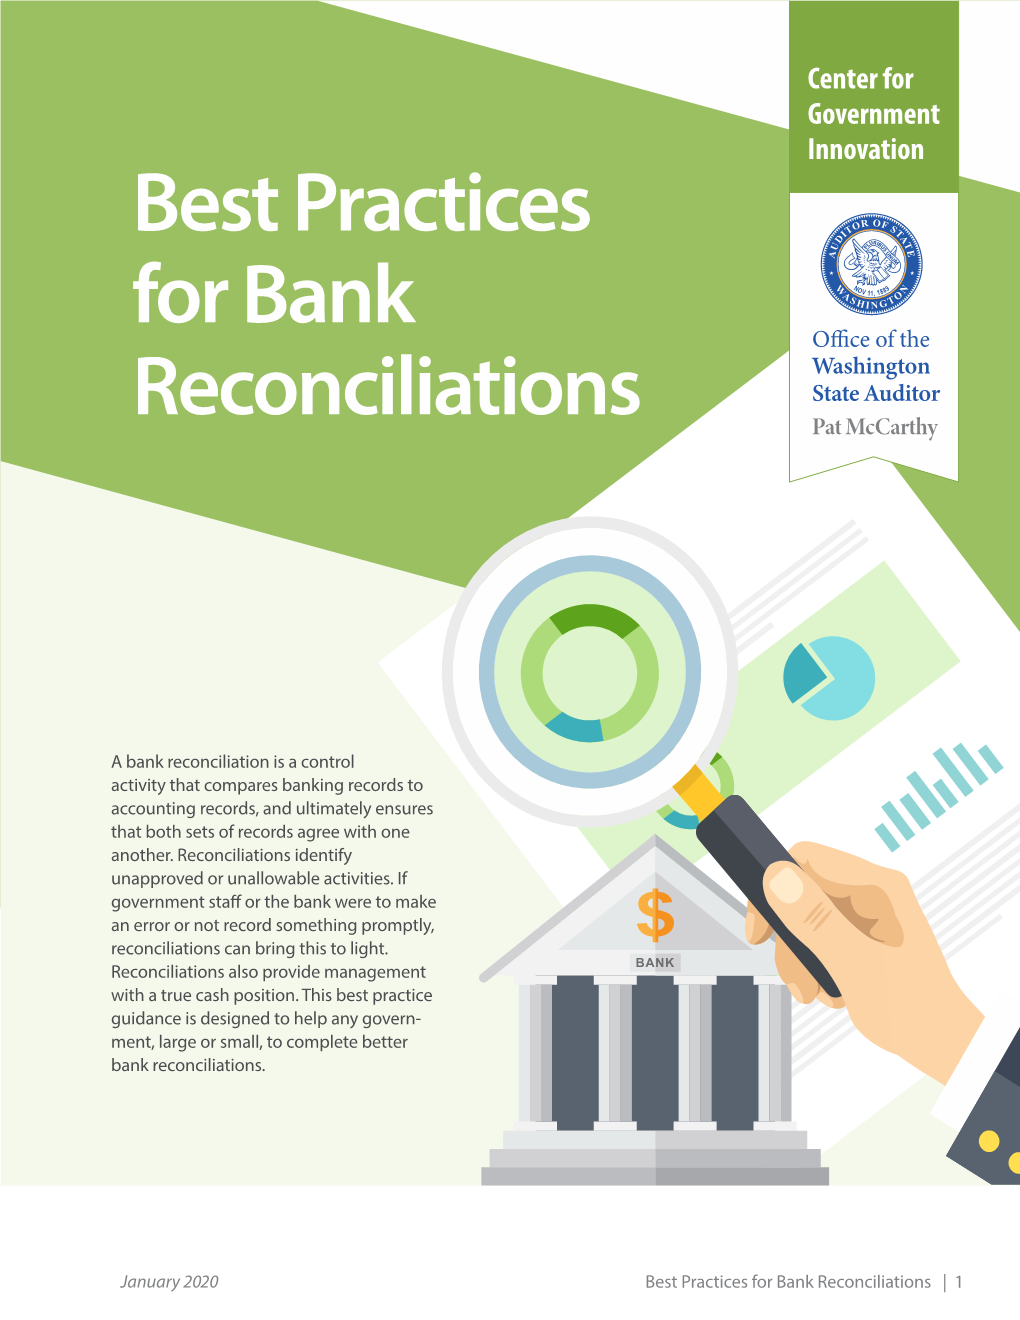 Best Practices for Bank Reconciliations